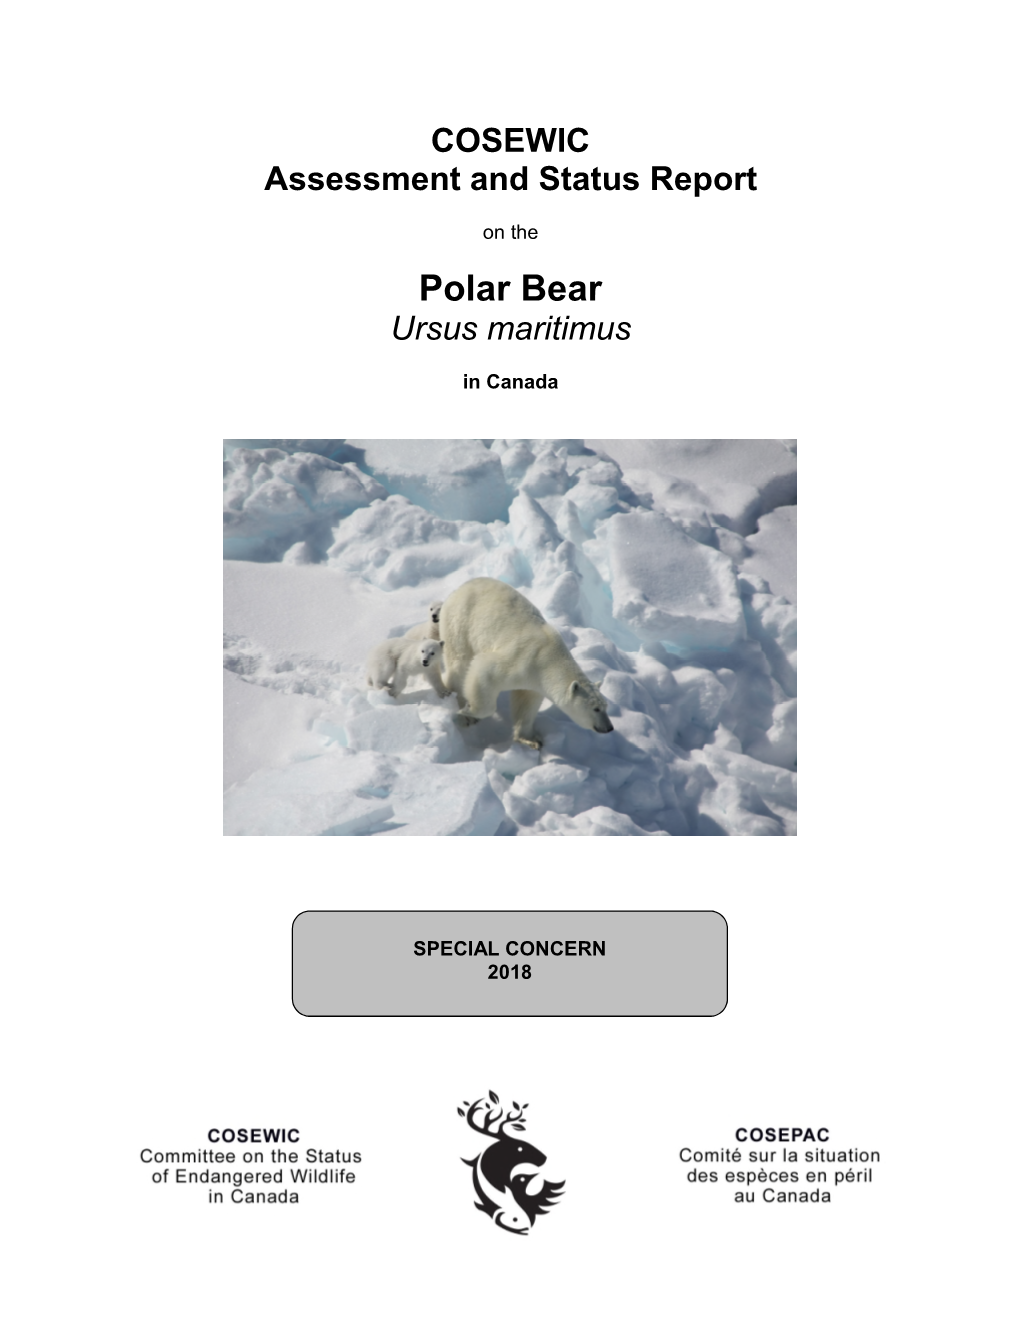 COSEWIC Assessment and Status Report on the Polar Bear Ursus Maritimus in Canada